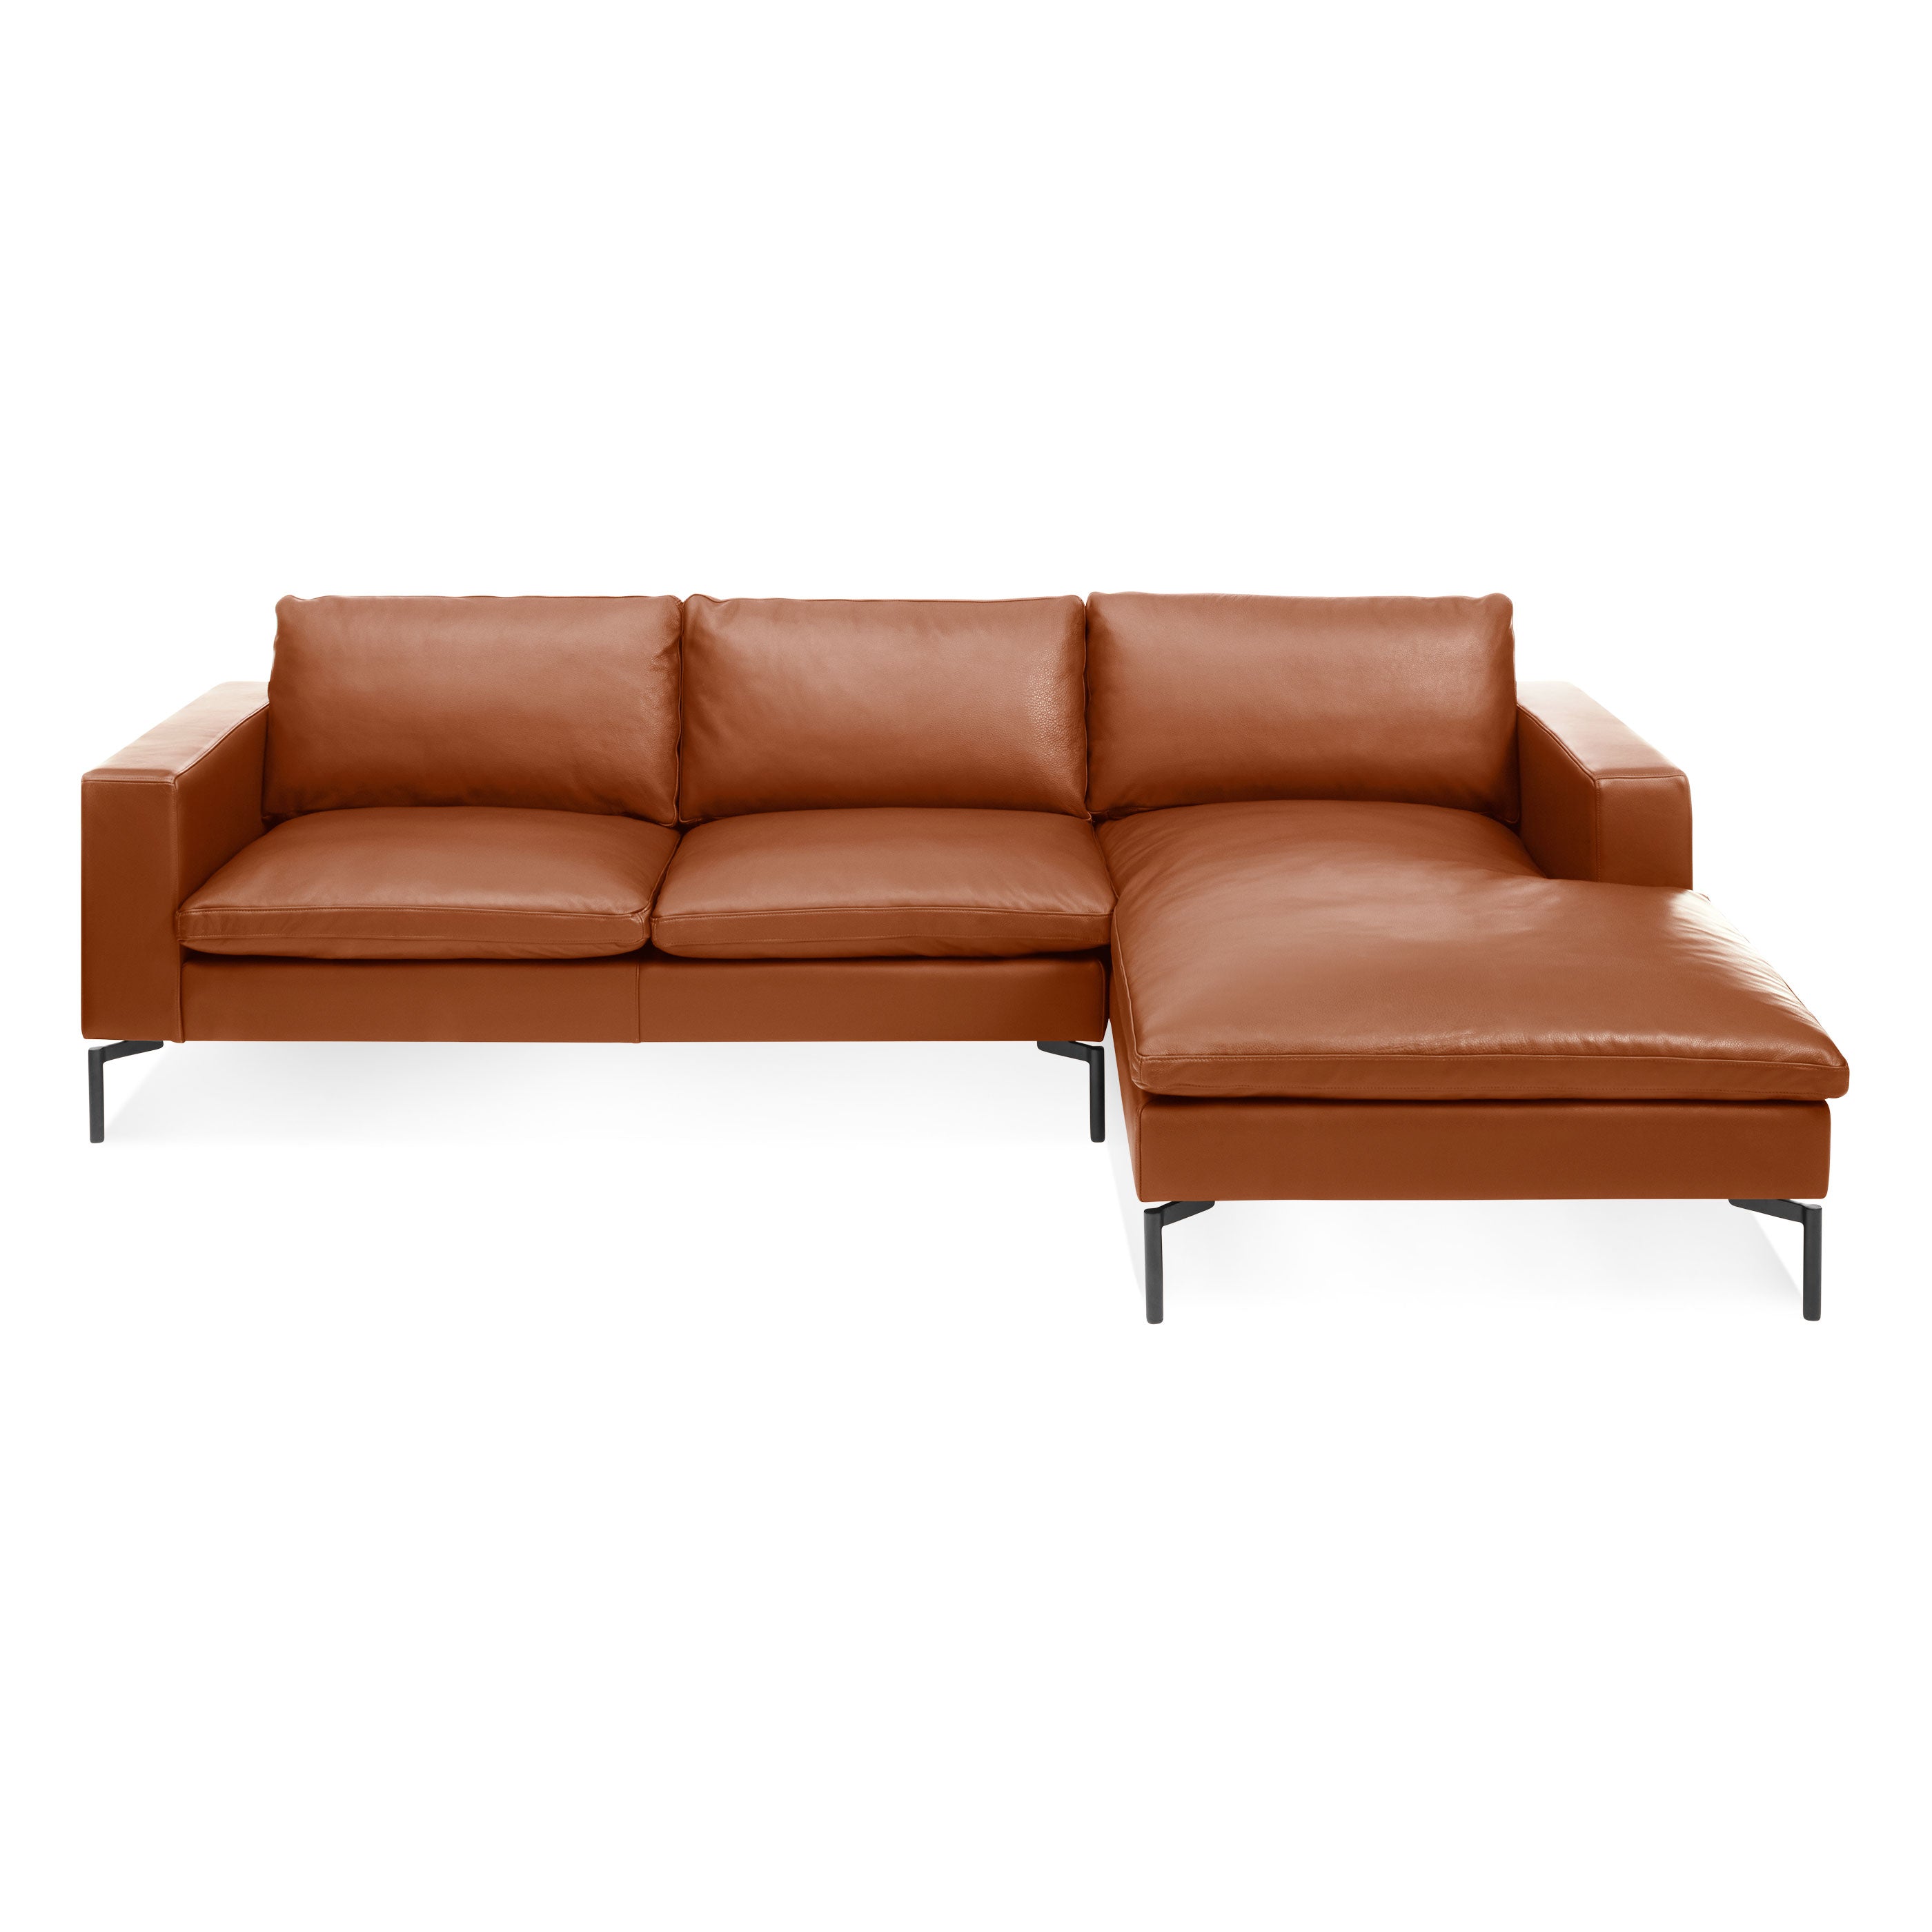 New Standard Sofa with Chaise